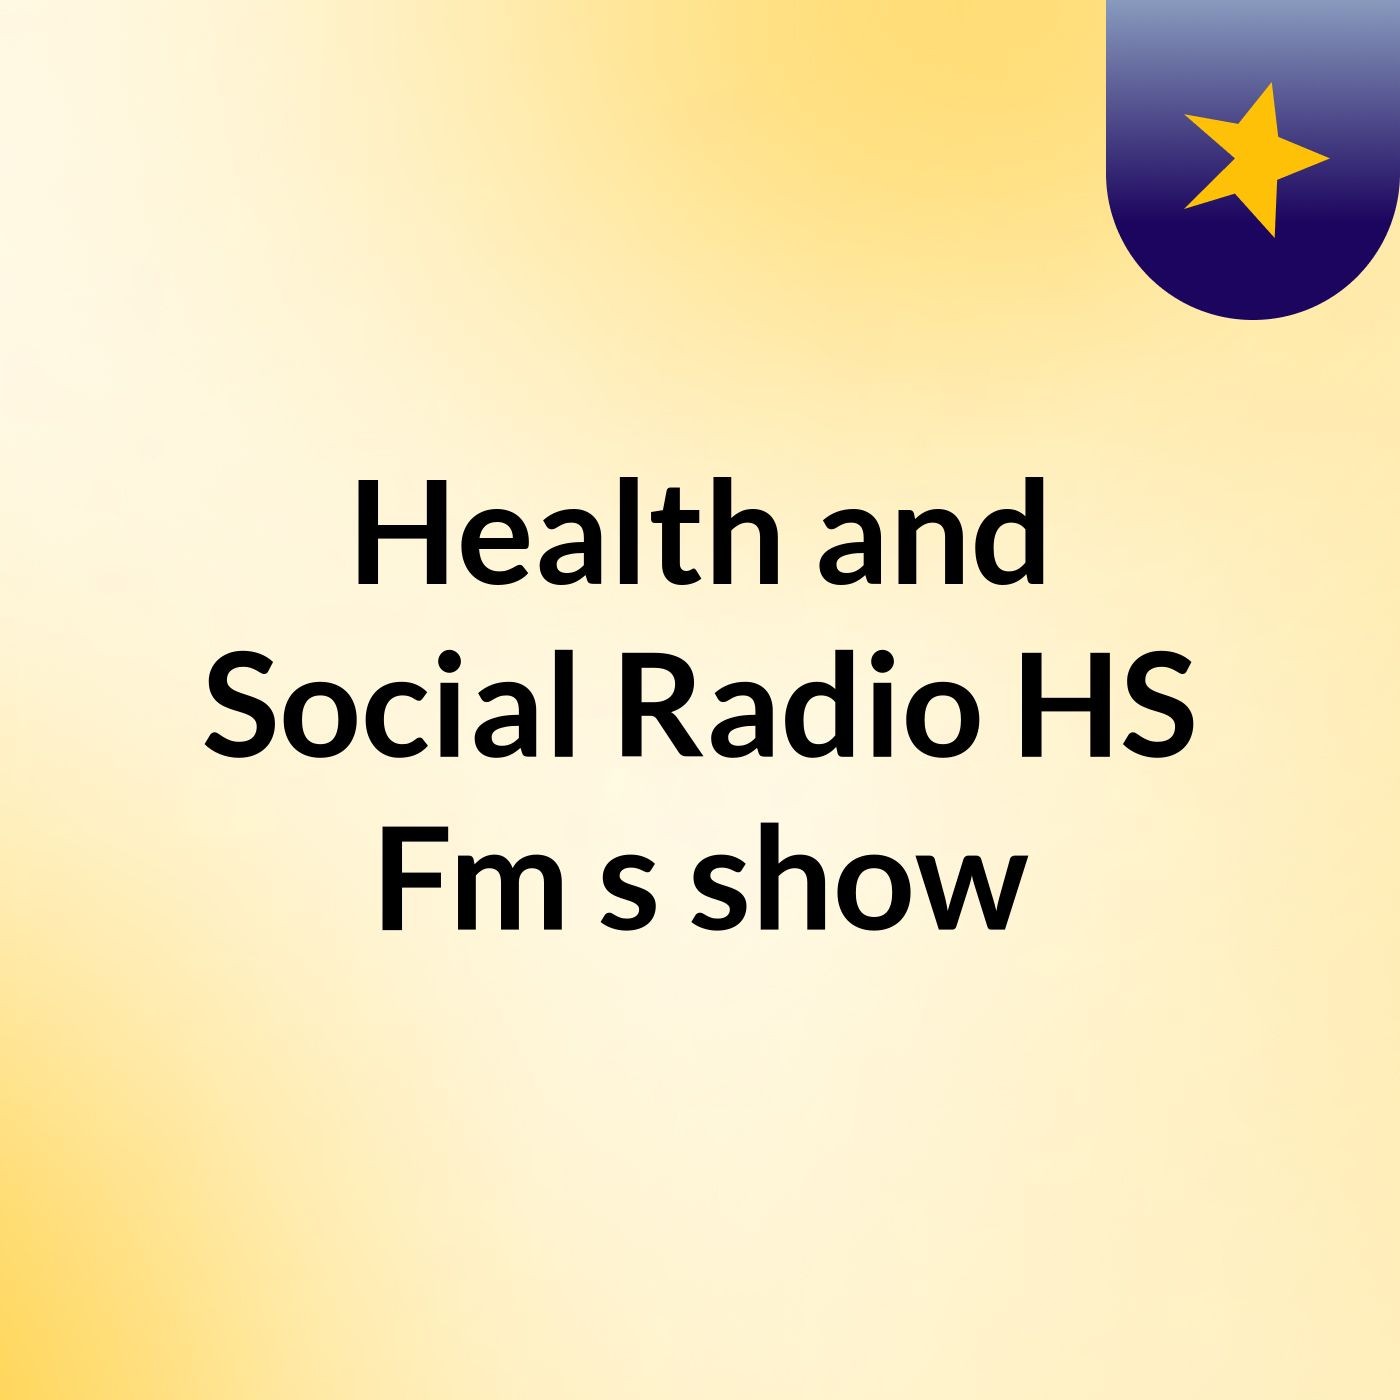 Episode 13 - Health and Social Radio HS Fm's show